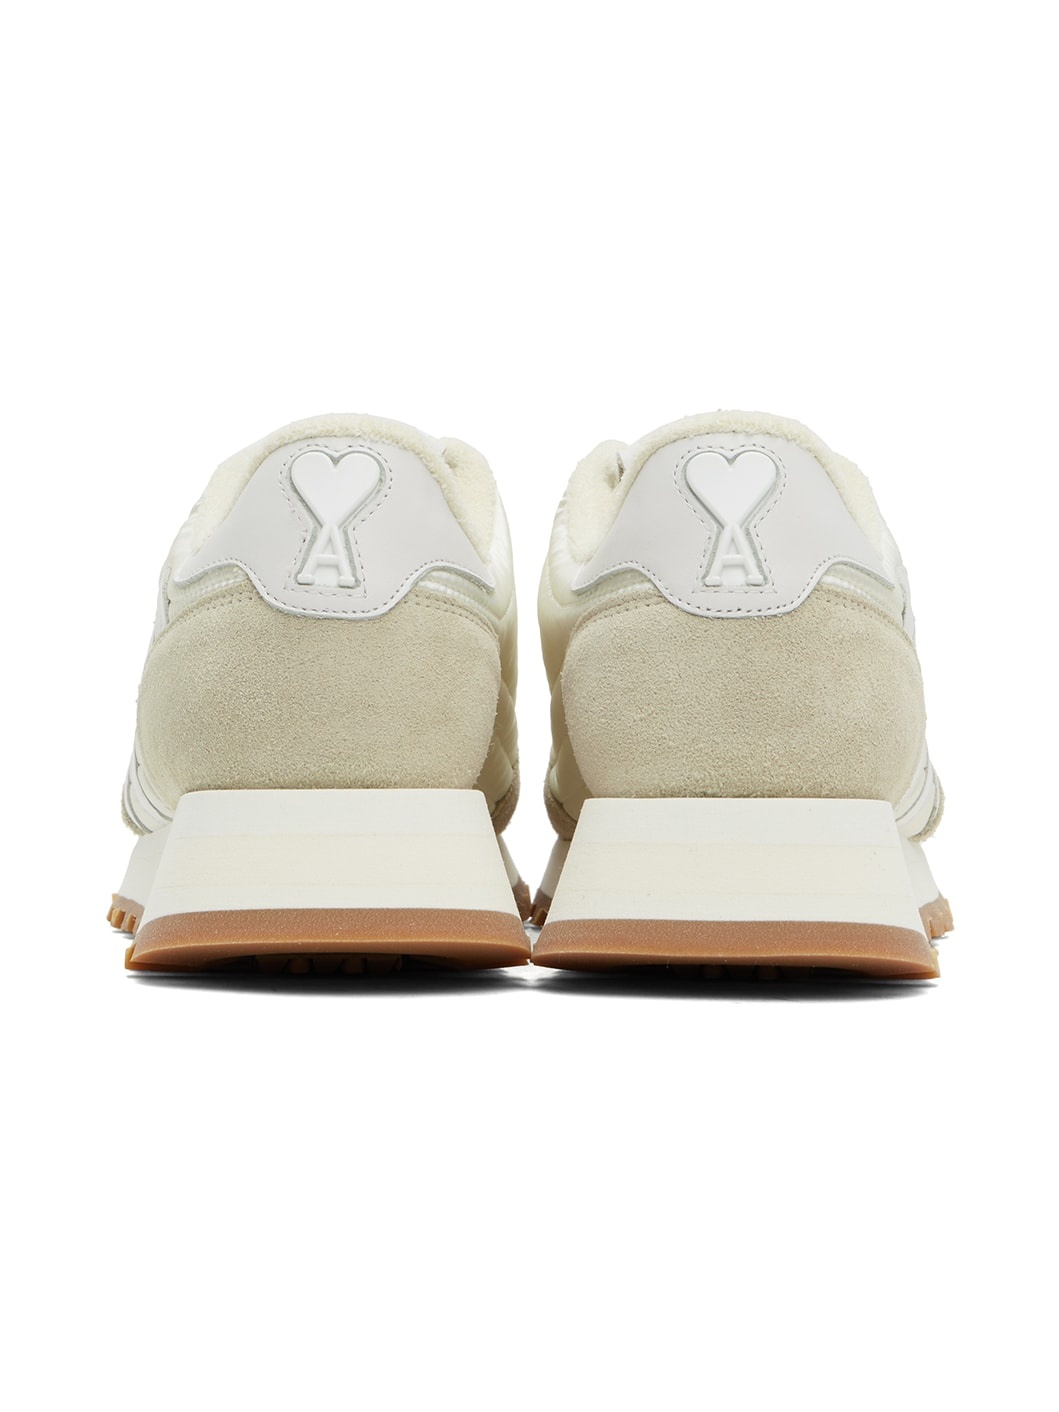 Off-White & Beige Rush Sneakers - 2